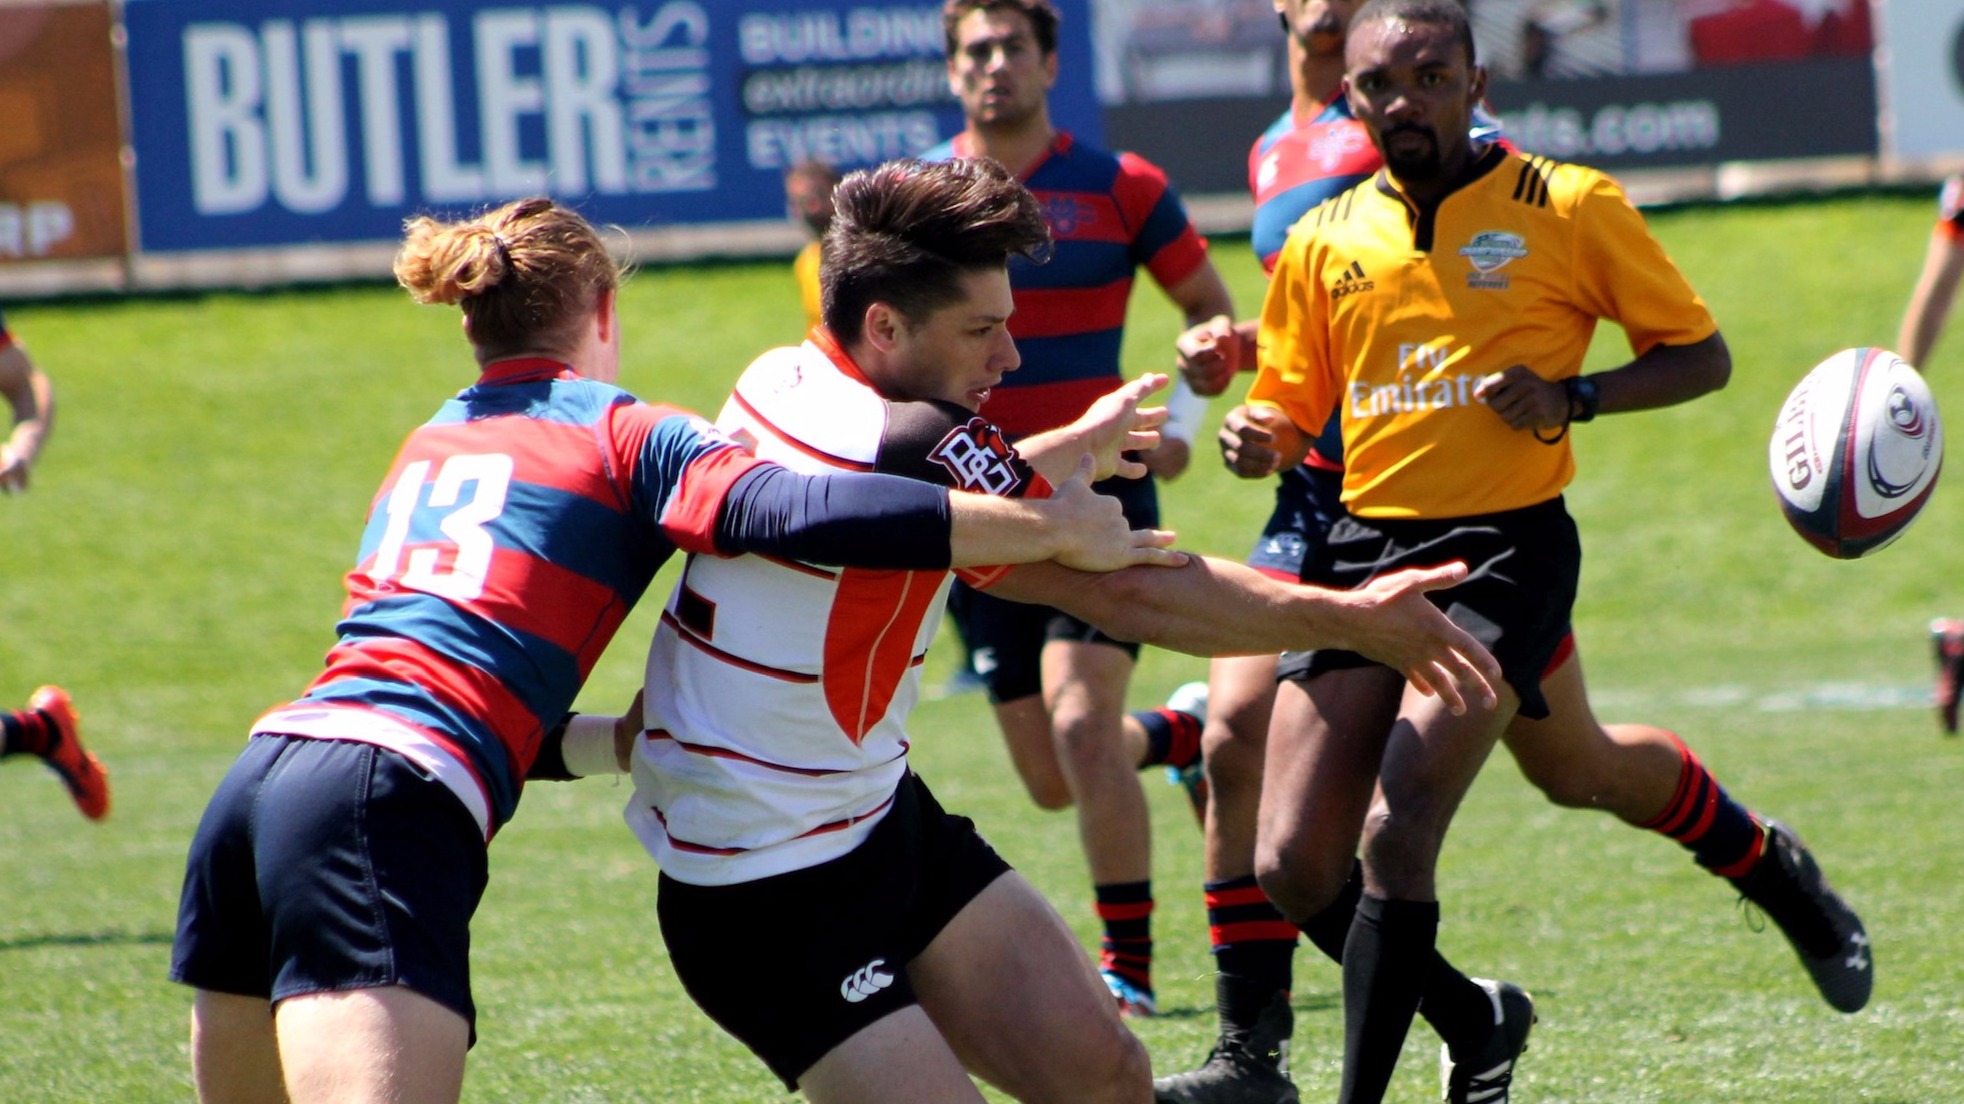 Saint Mary's v Bowling Green at USA Rugby College 7s Nationals. Ary Shoppe photo.